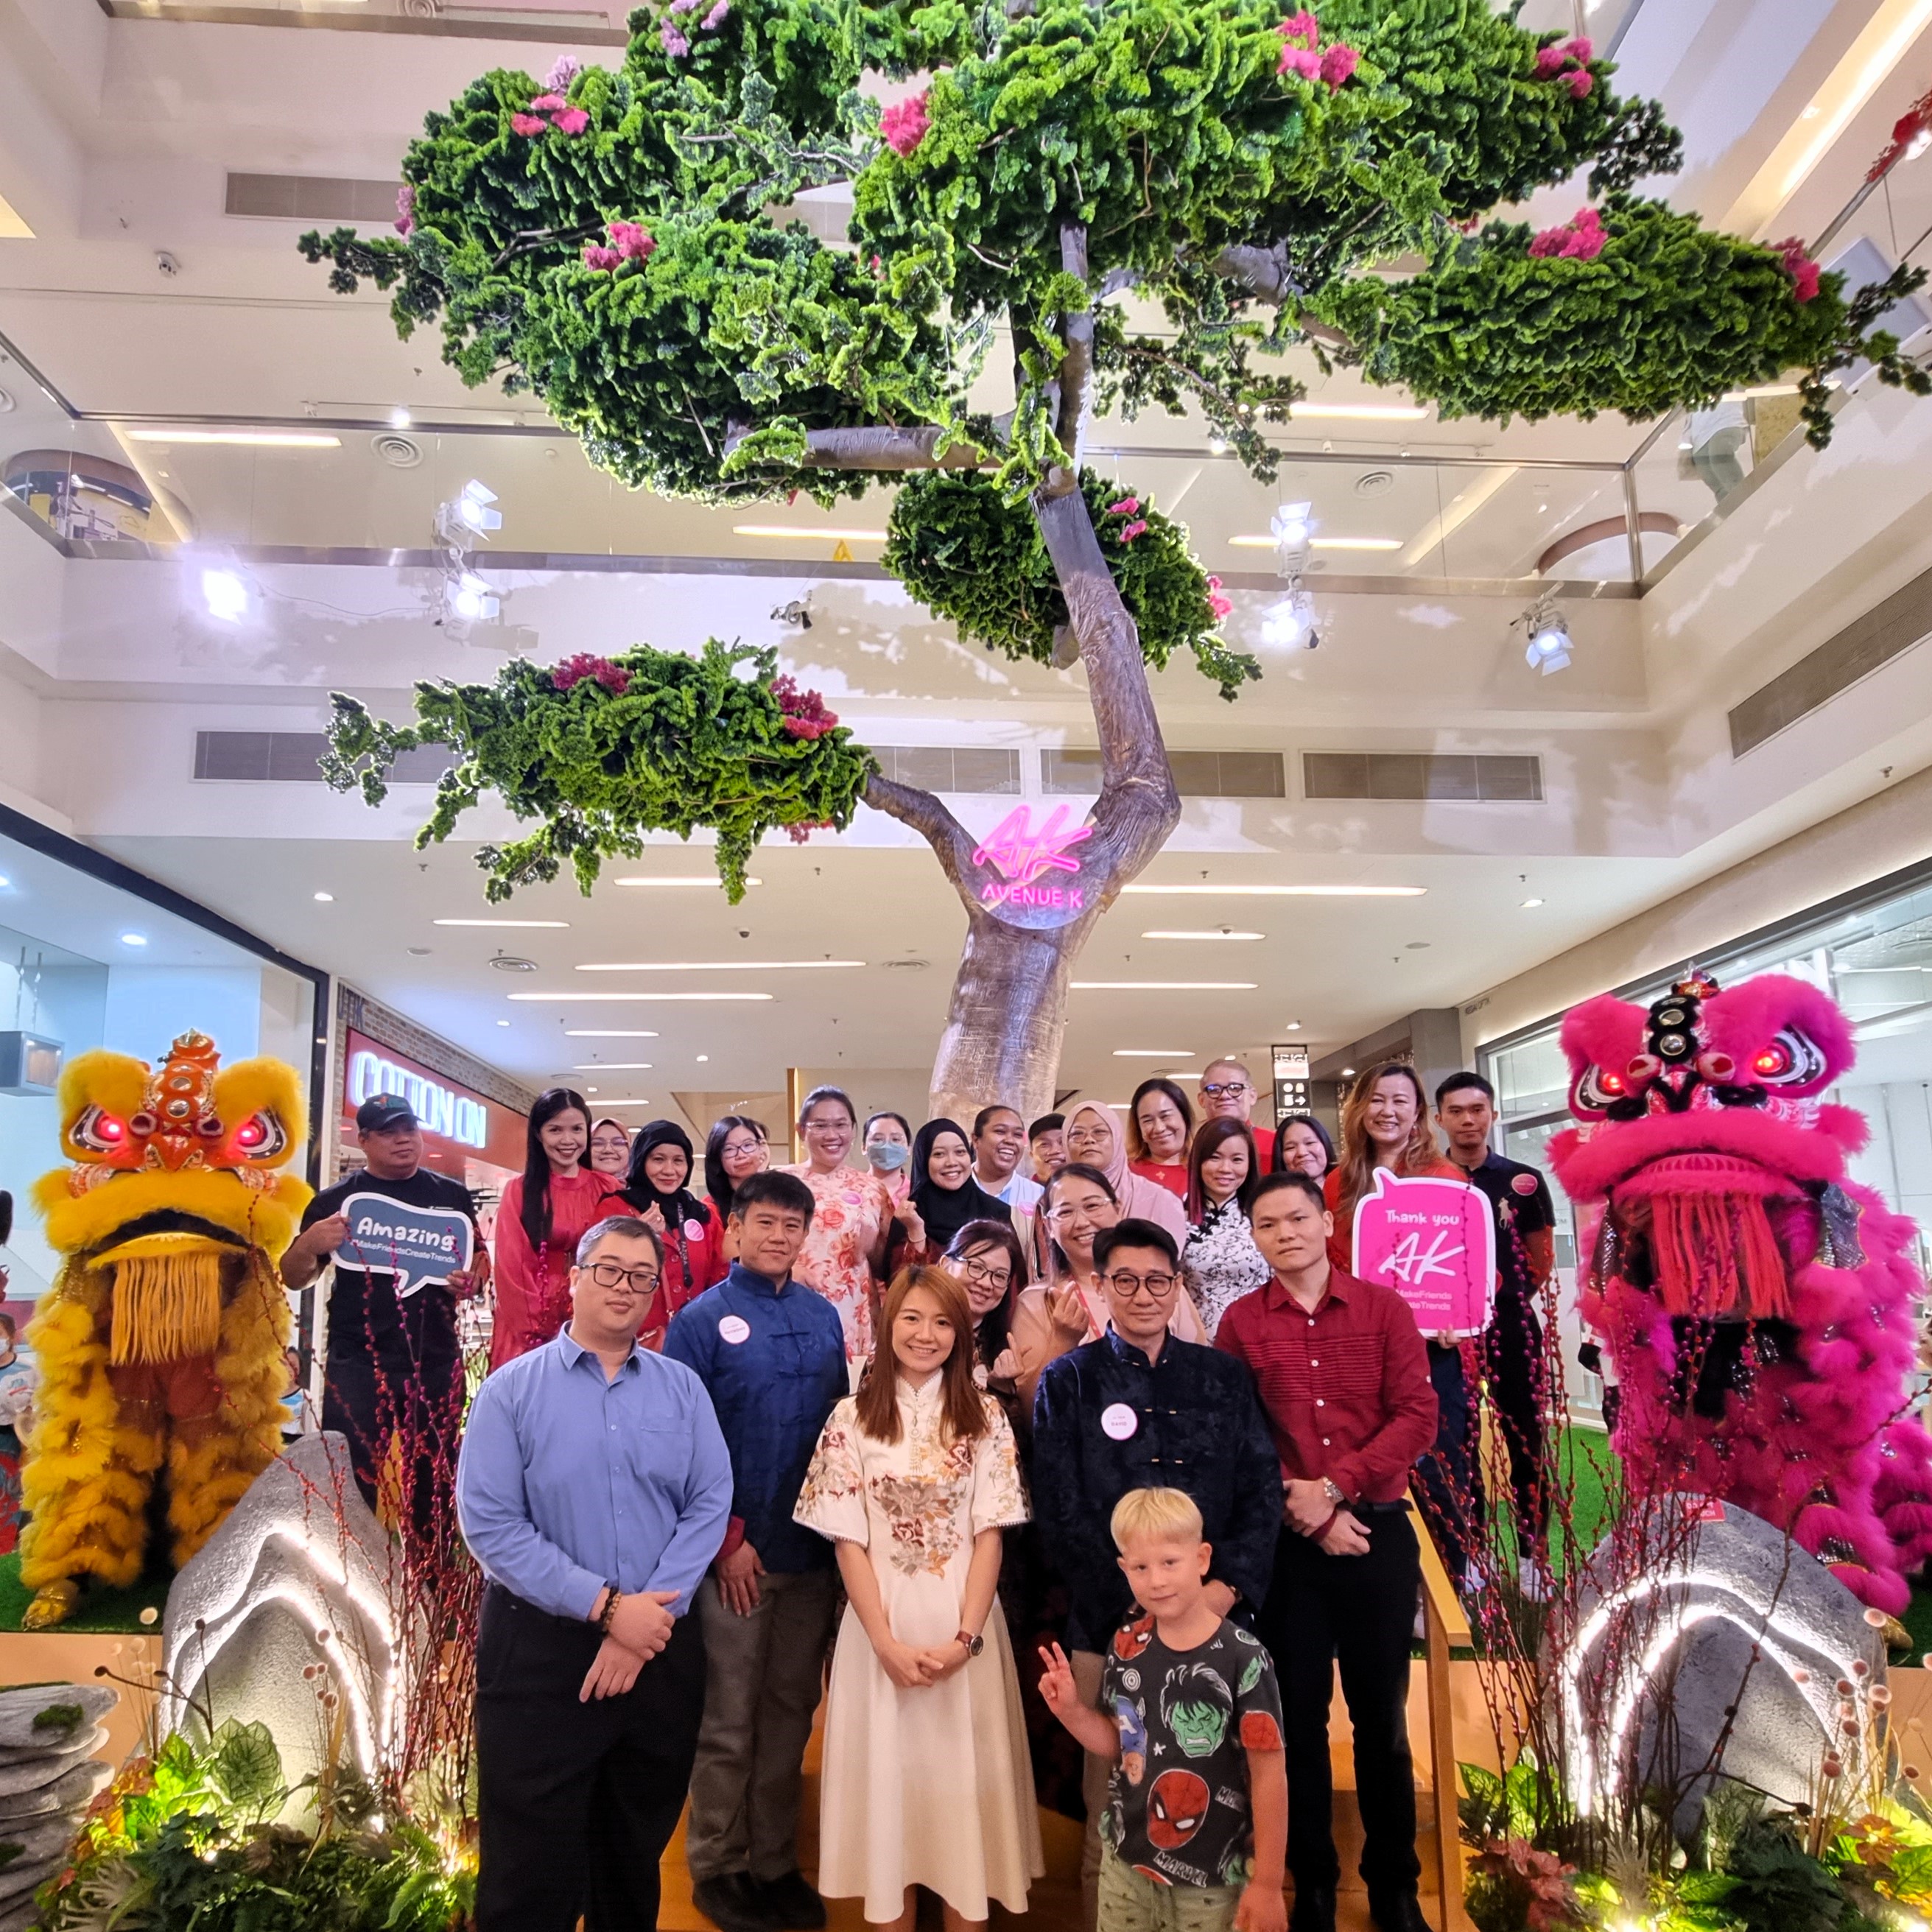 Avenue K Shopping Mall launches its 'Eden of Opulence', a nature retreat concept campaign this Chinese New Year.